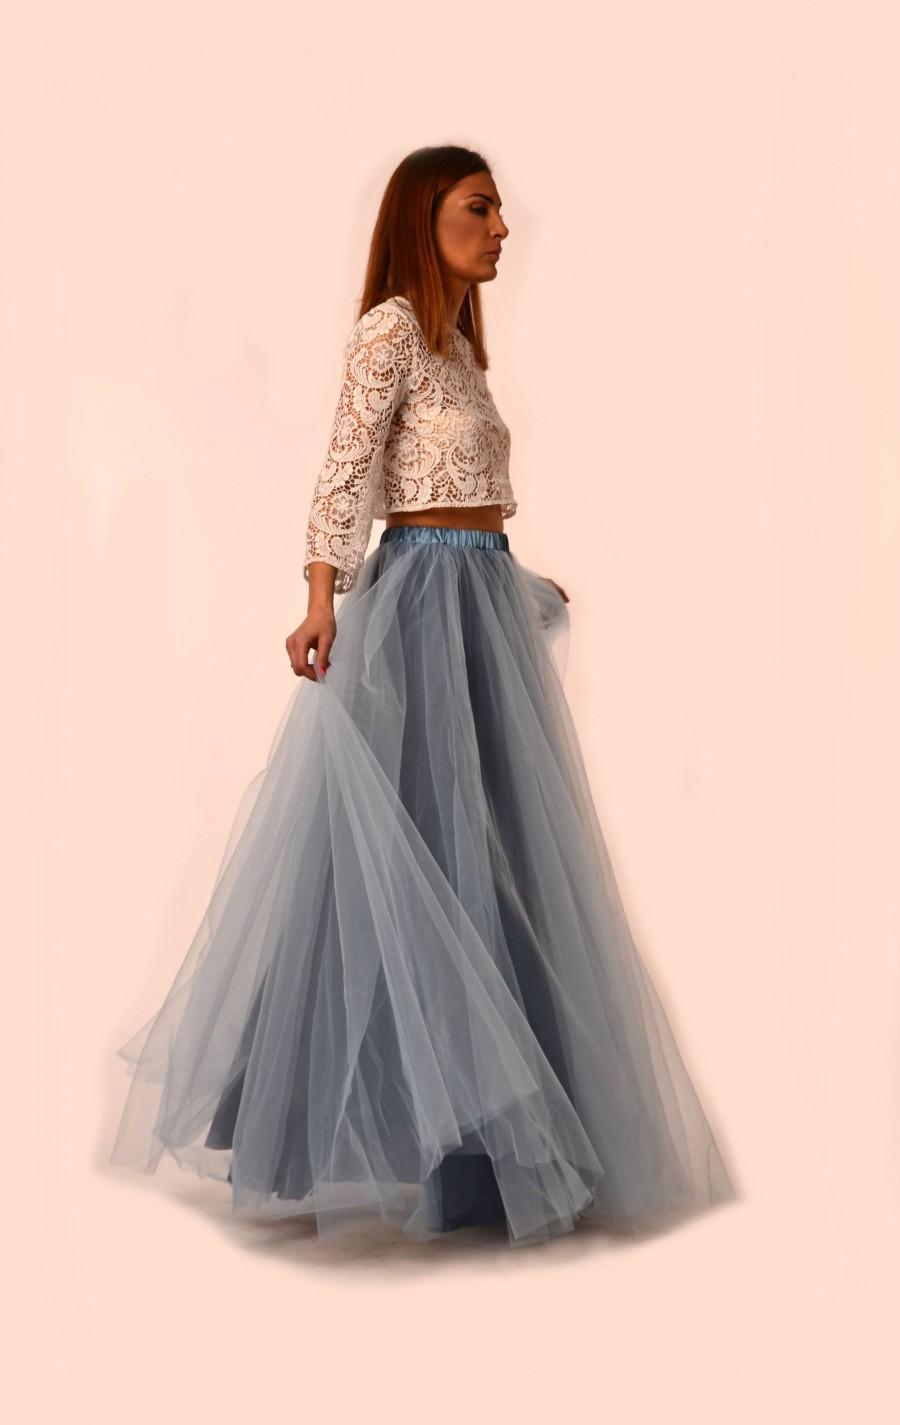 Dusty Blue Tulle Skirt Maxi Tulle Skirt Made To Measure Long Bridesmaids Tulle Skirt Bridal 7295